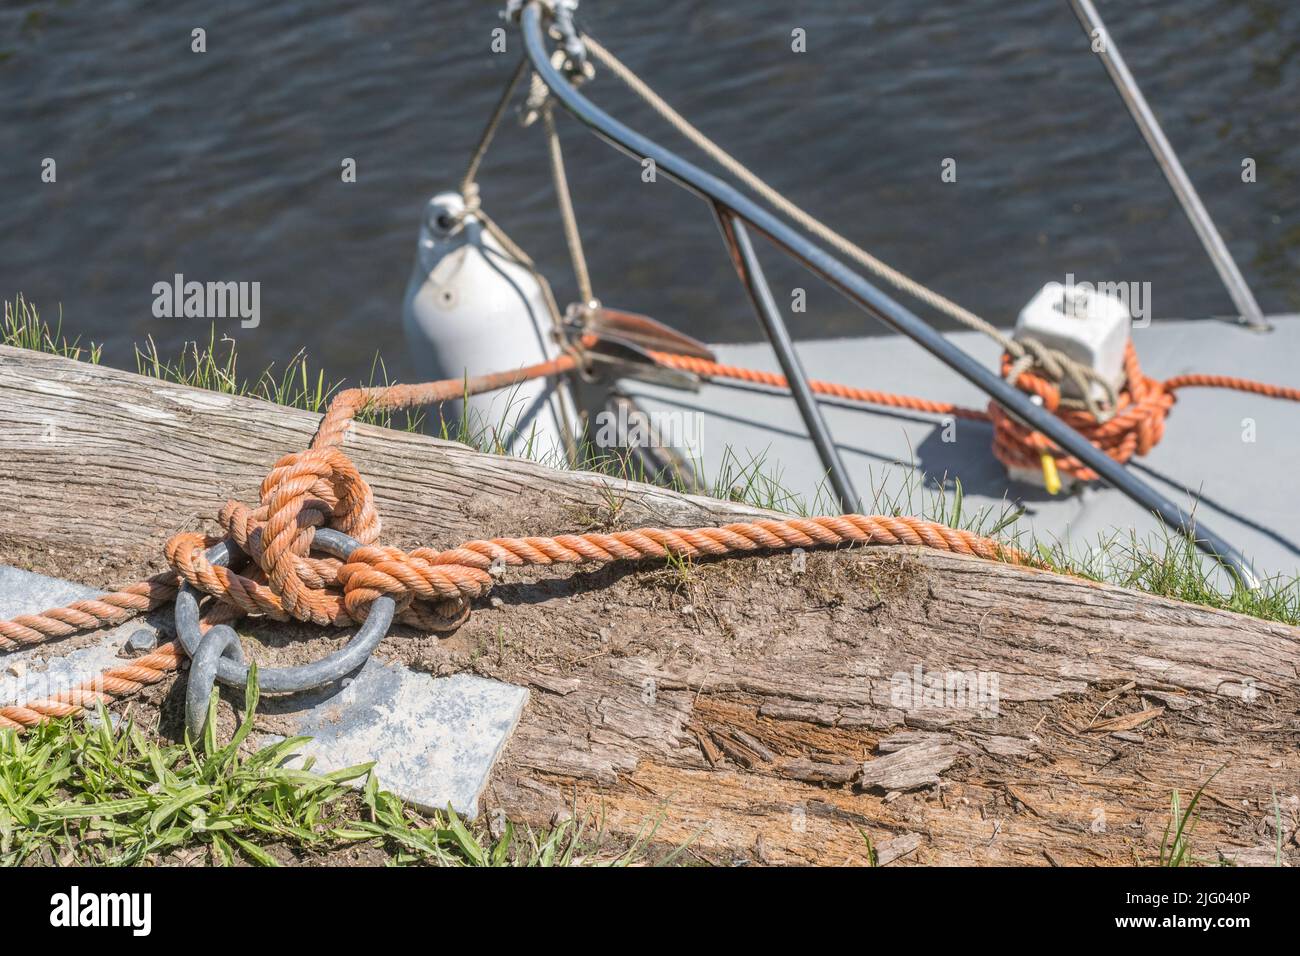 Sunny quayside with boat mooring rope attached to metal mooring ring. For UK sailing and boating activities, something secured, tethered, tied up. Stock Photo